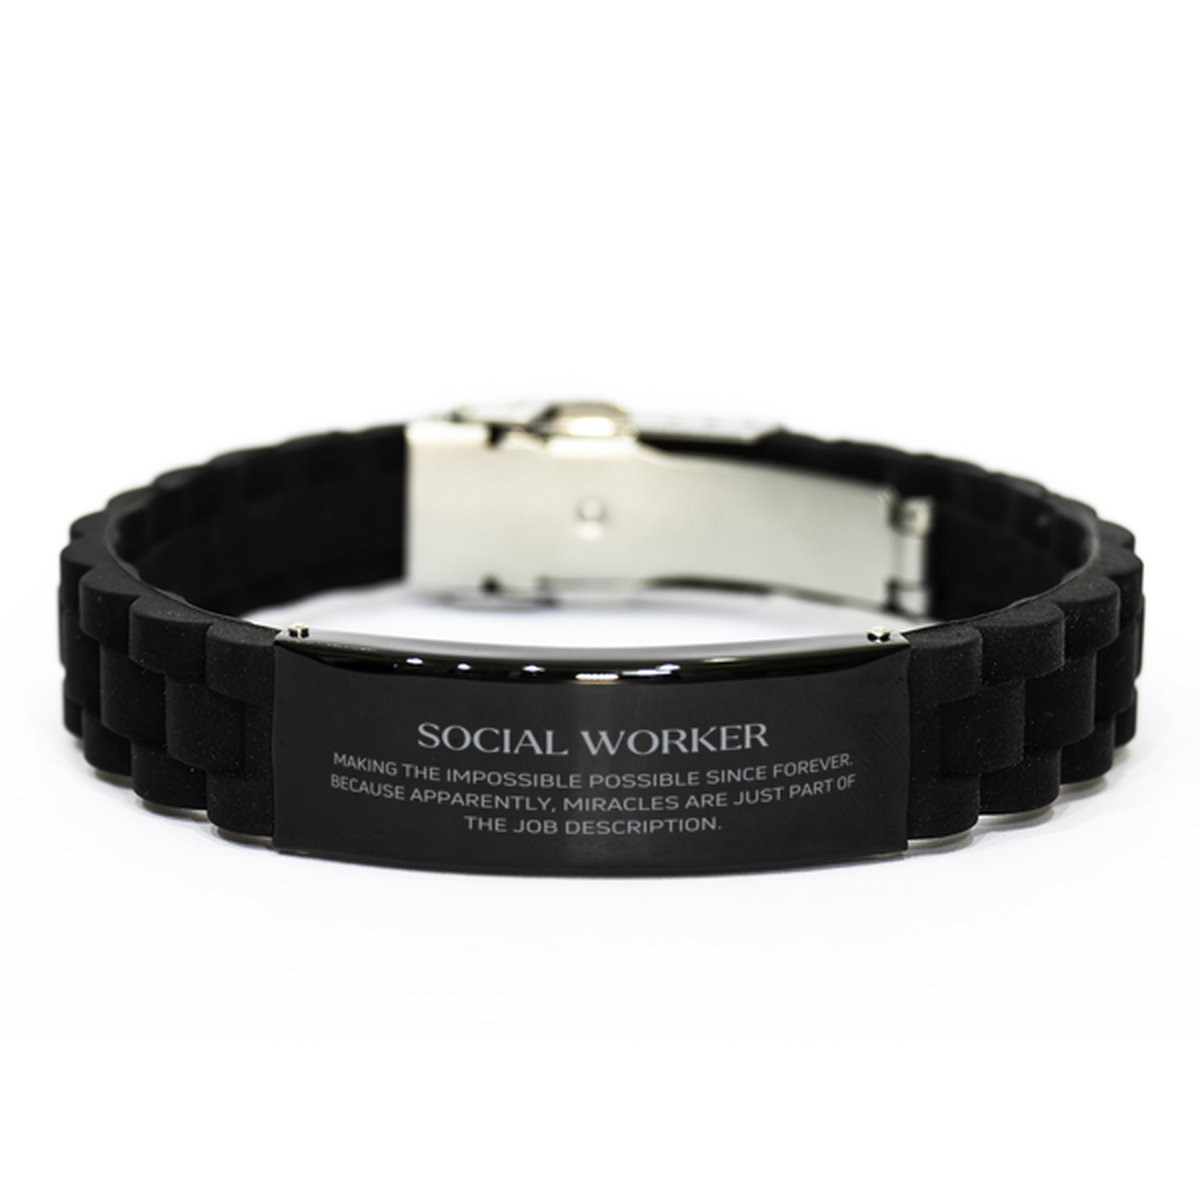 Funny Social Worker Gifts, Miracles are just part of the job description, Inspirational Birthday Black Glidelock Clasp Bracelet For Social Worker, Men, Women, Coworkers, Friends, Boss